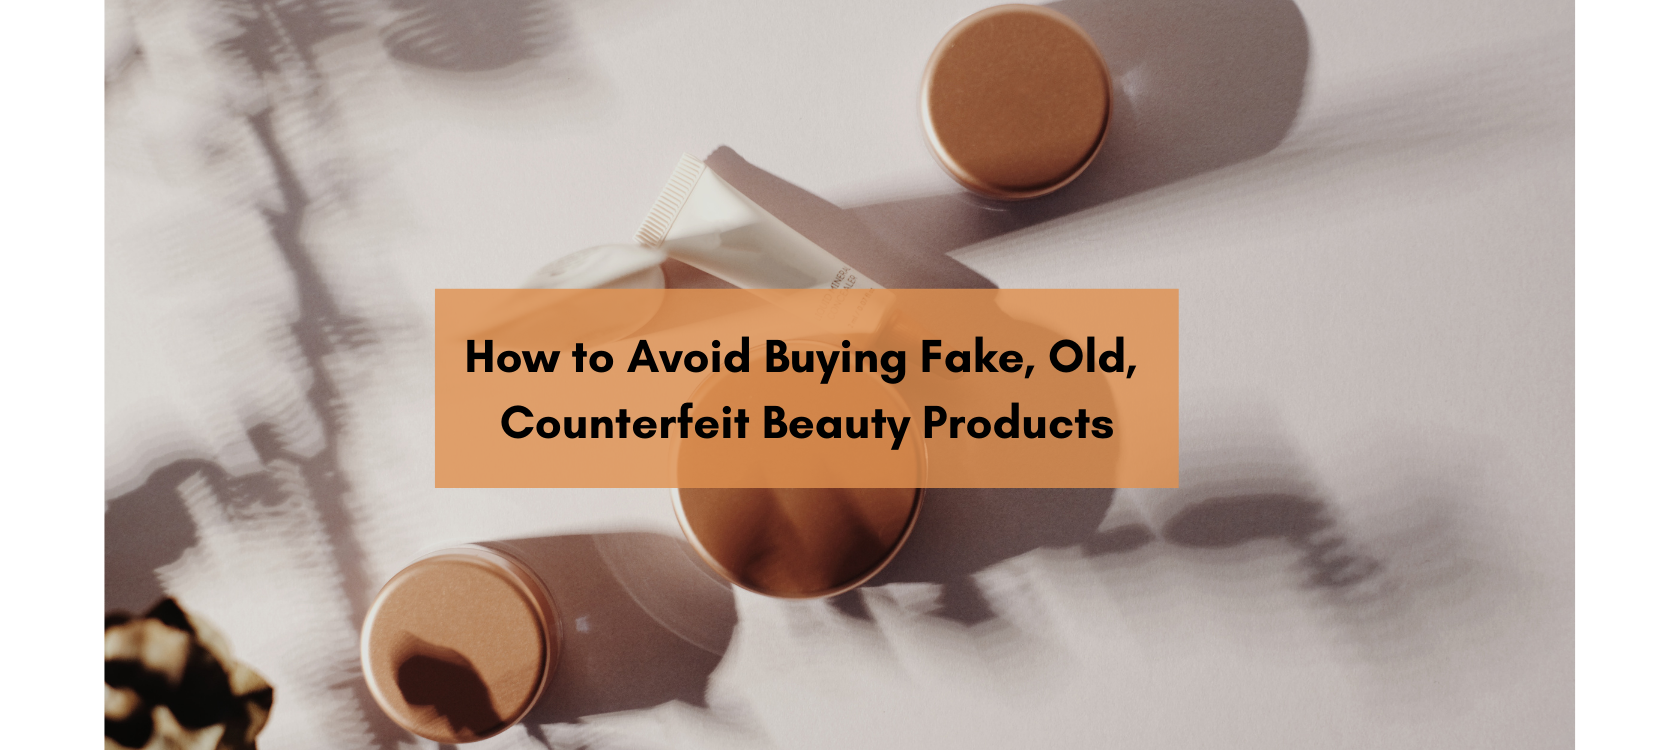 The Dangers of Buying Counterfeit, Tampered Beauty Products and How to Ensure You’re Getting The Real Deal: